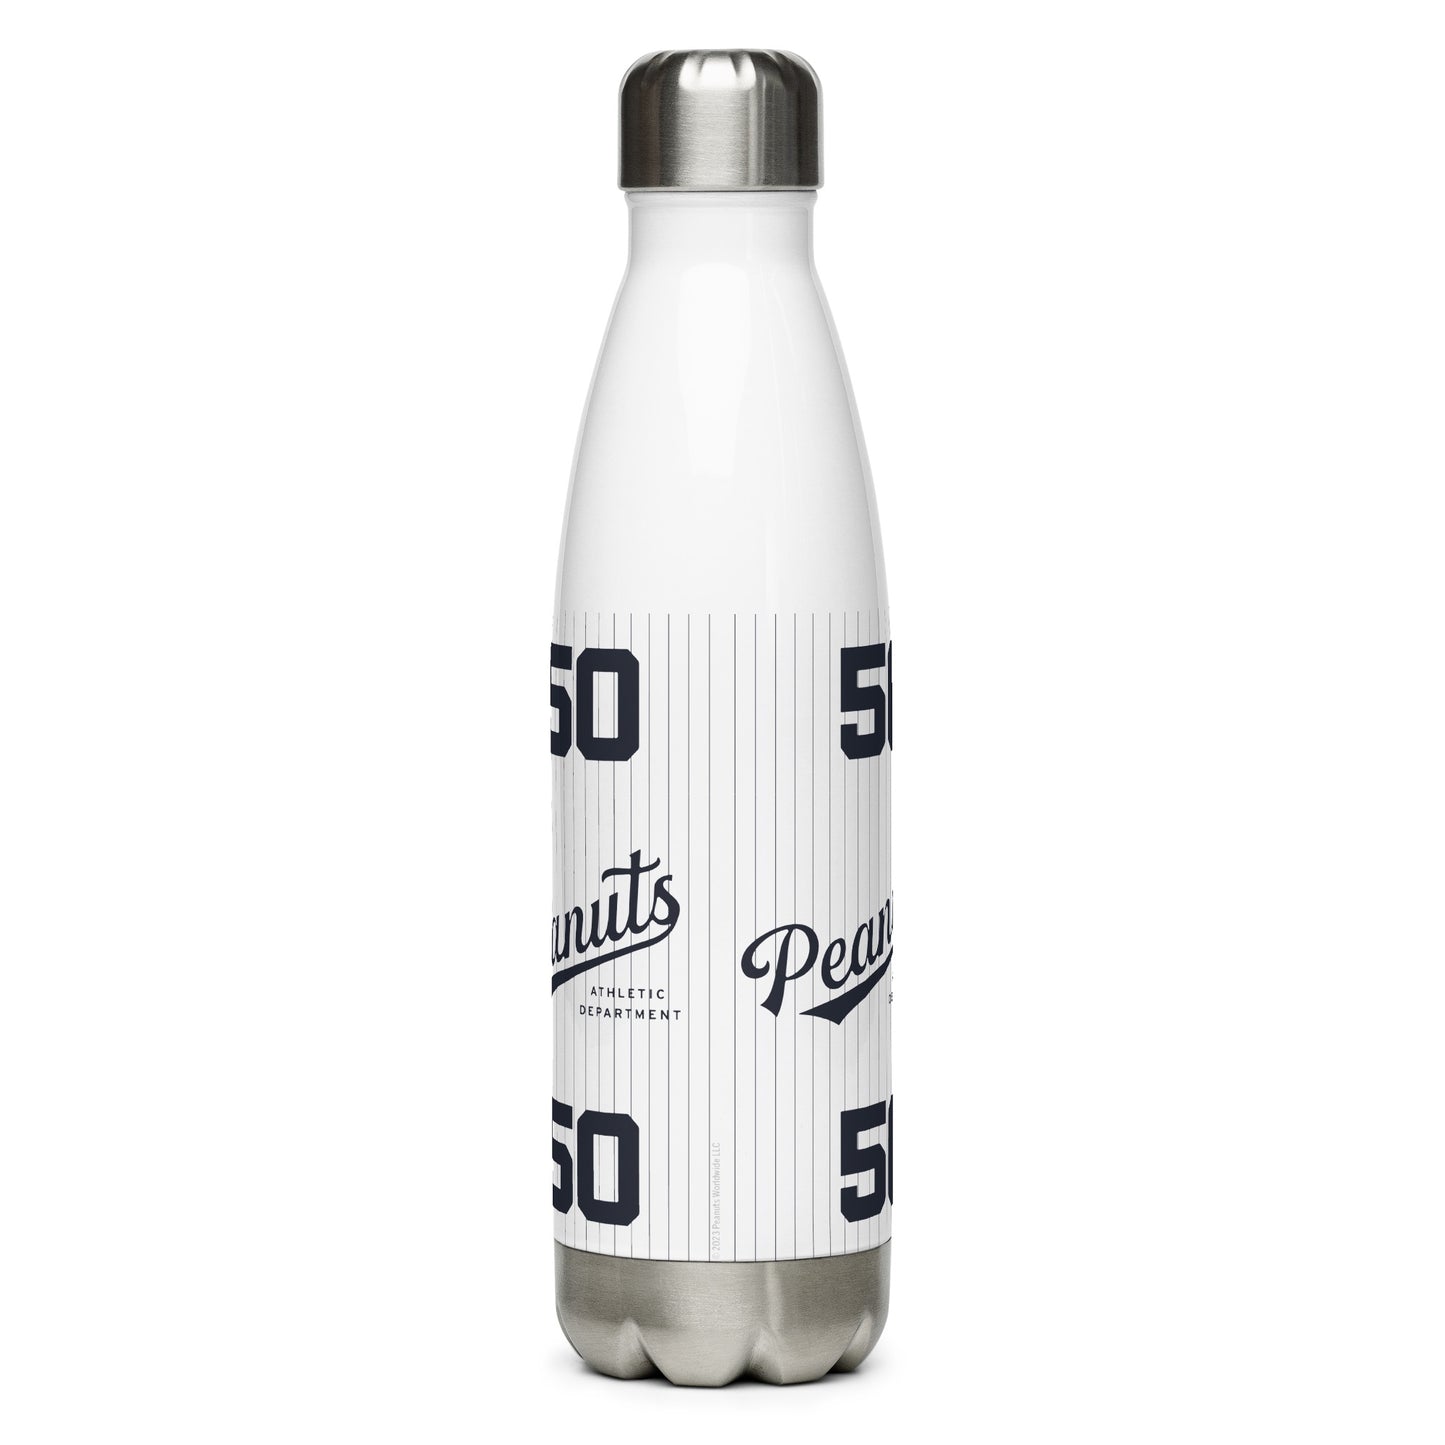 Peanuts Athletic Department Snoopy Water Bottle